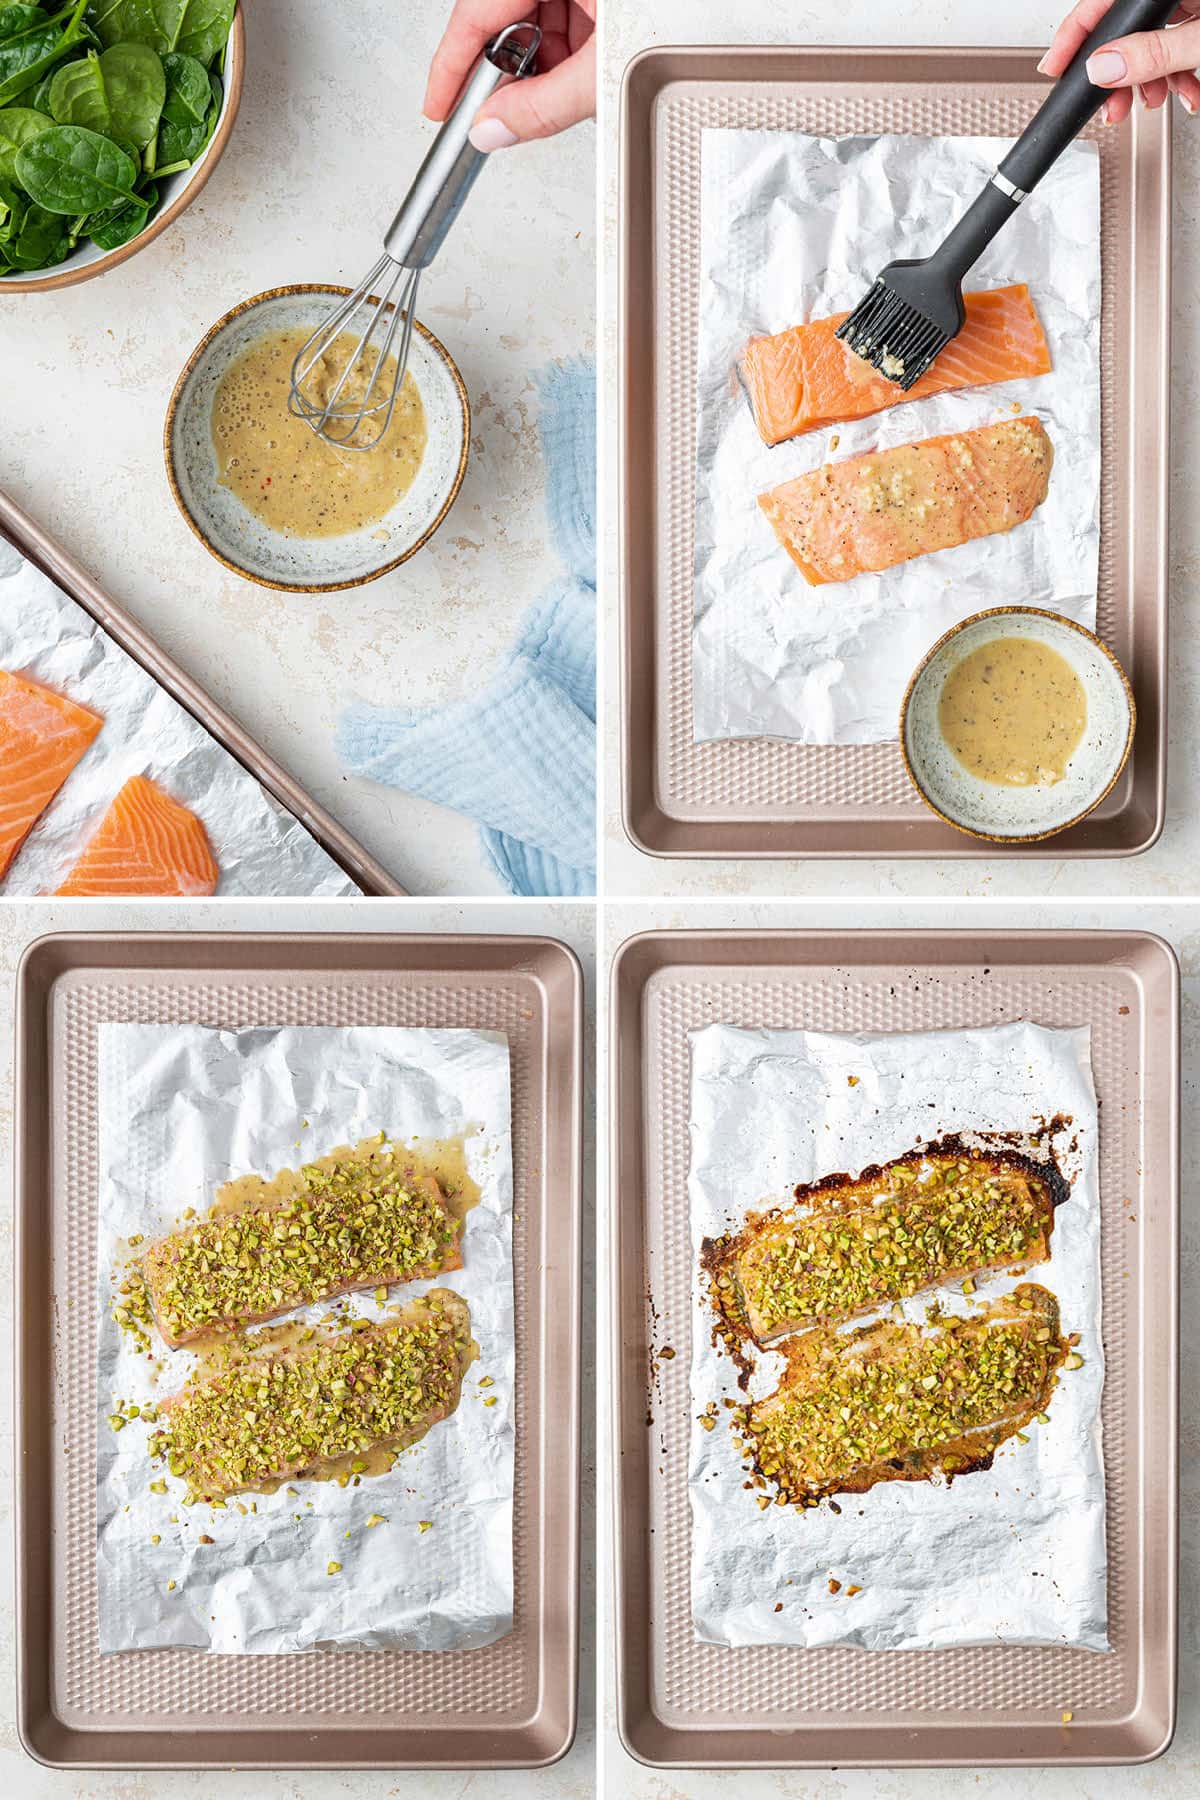 Collage of four photos showing how to make pistachio salmon: brushing a dijon lemon mixture onto the salmon, topping with pistachios and then baking.